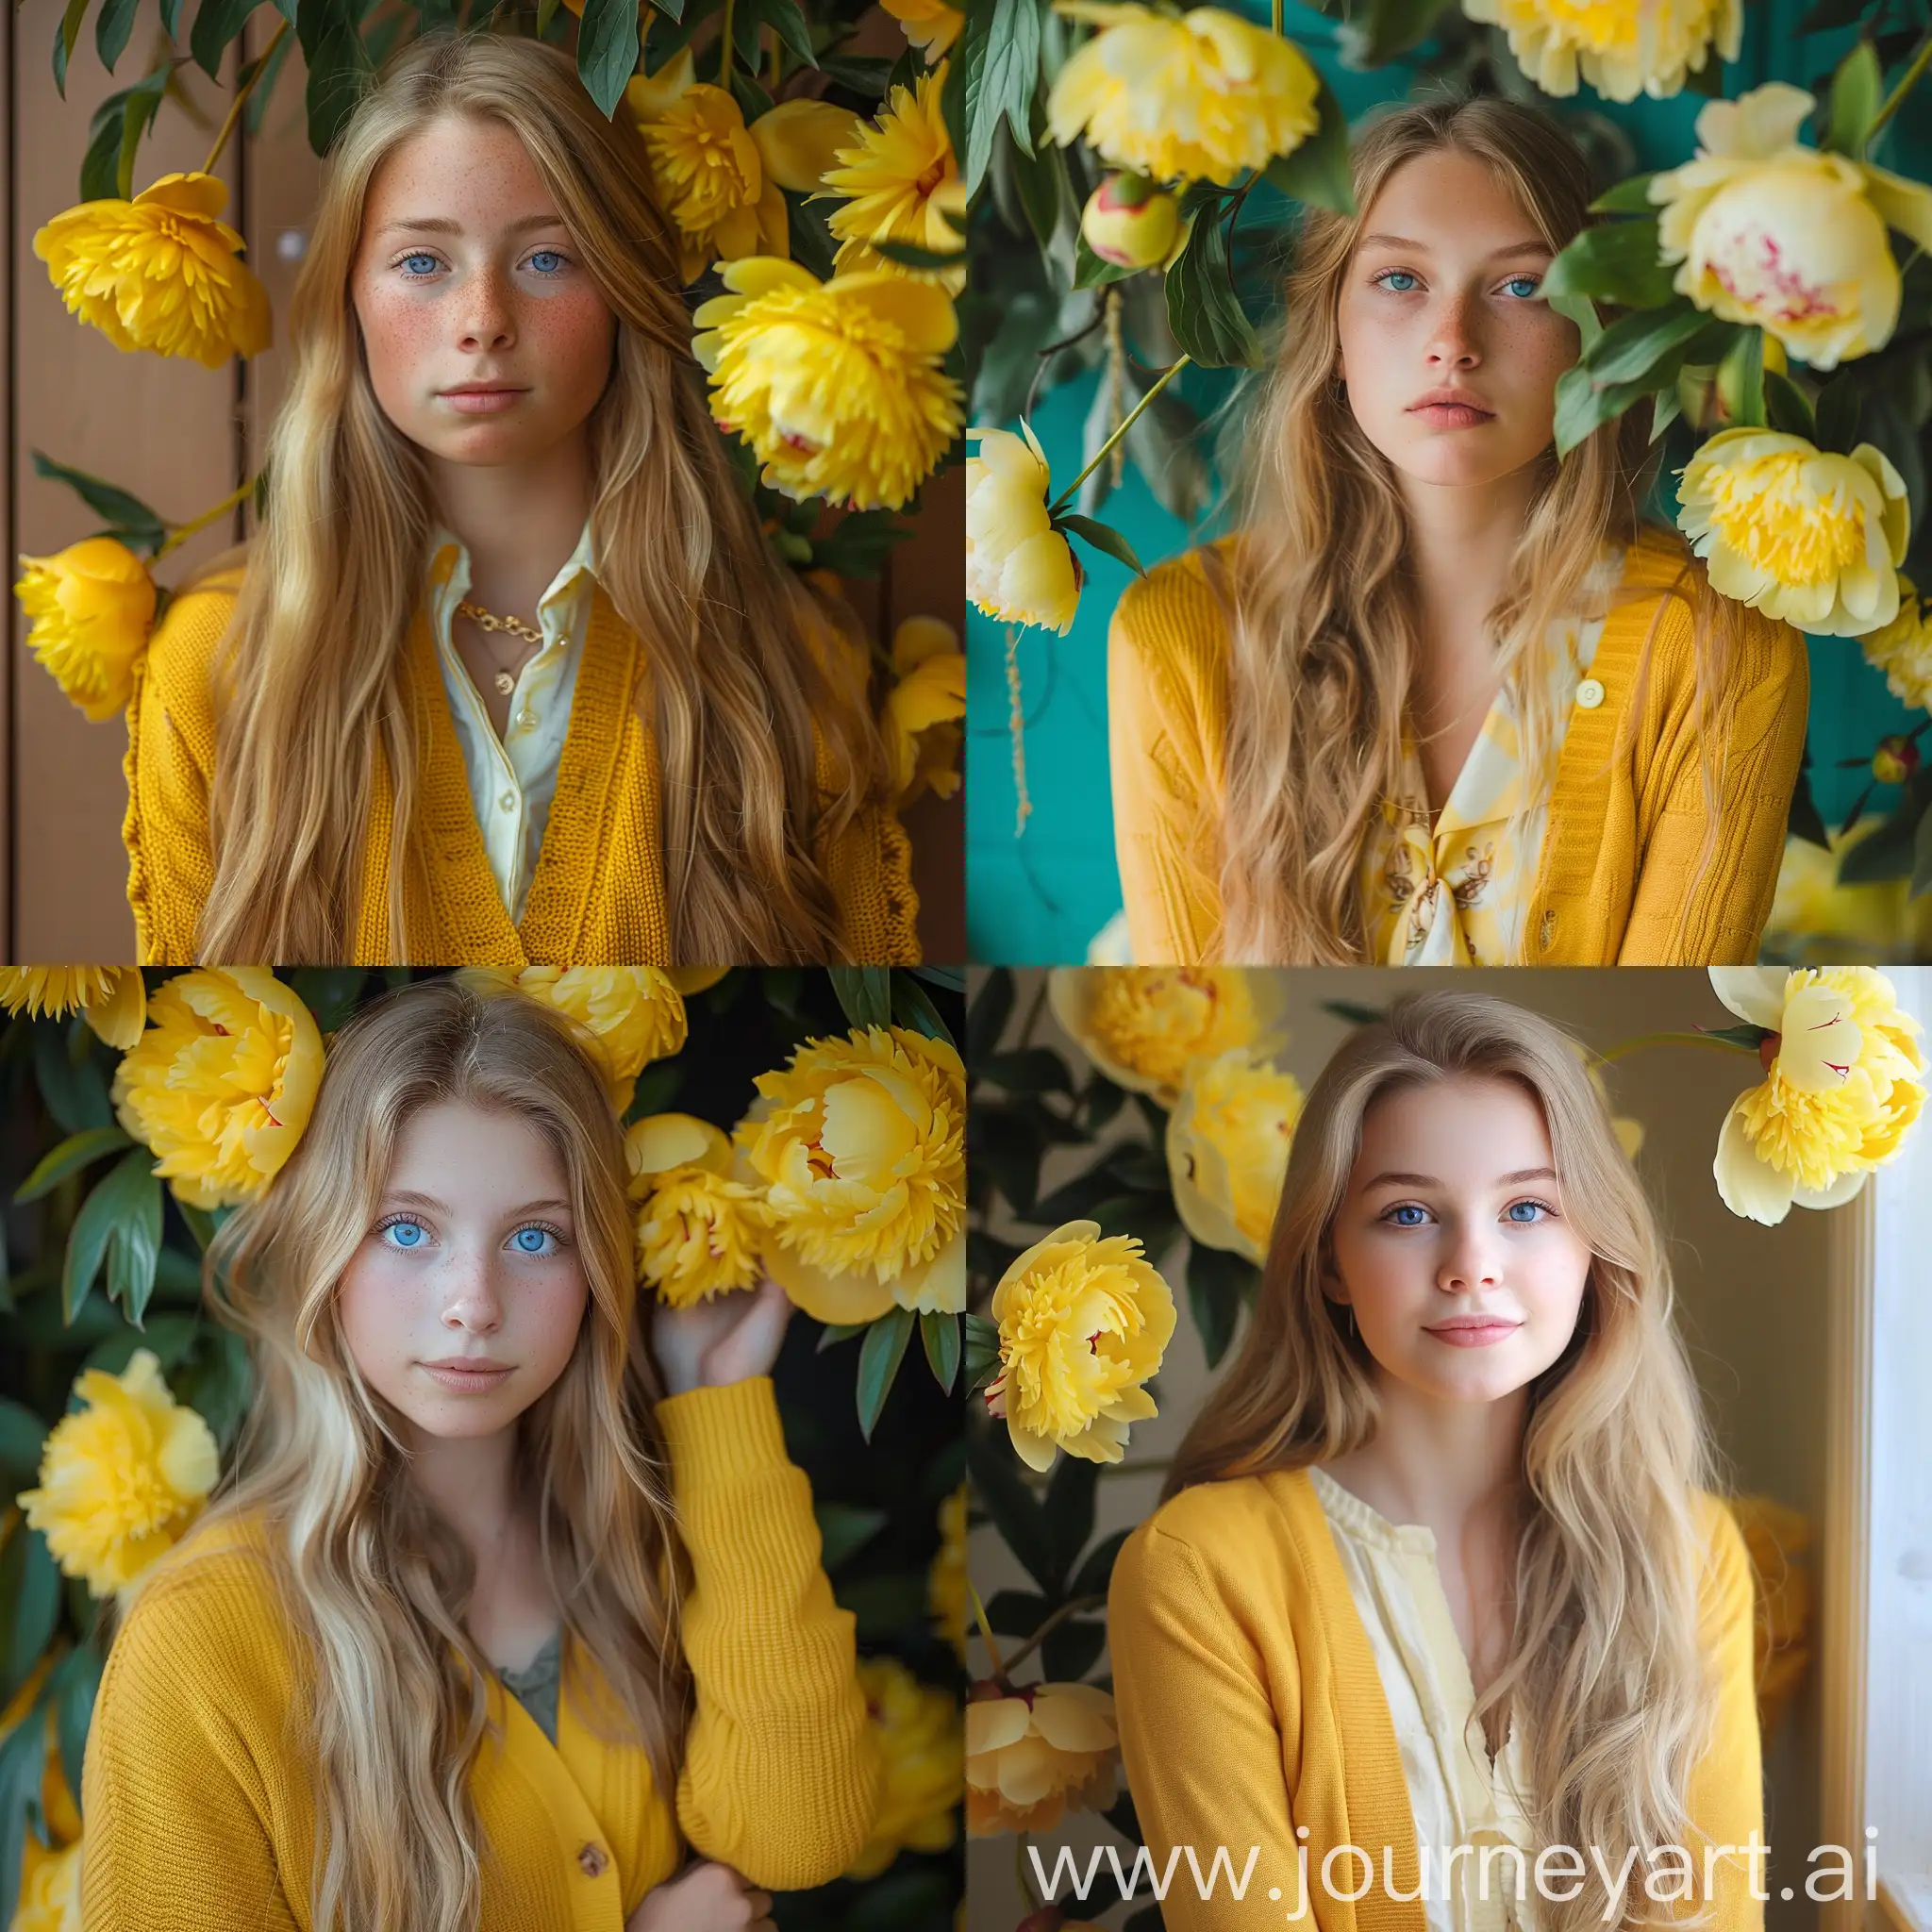 Tranquil-Student-with-Yellow-Peonies-in-Yellow-Cardigan